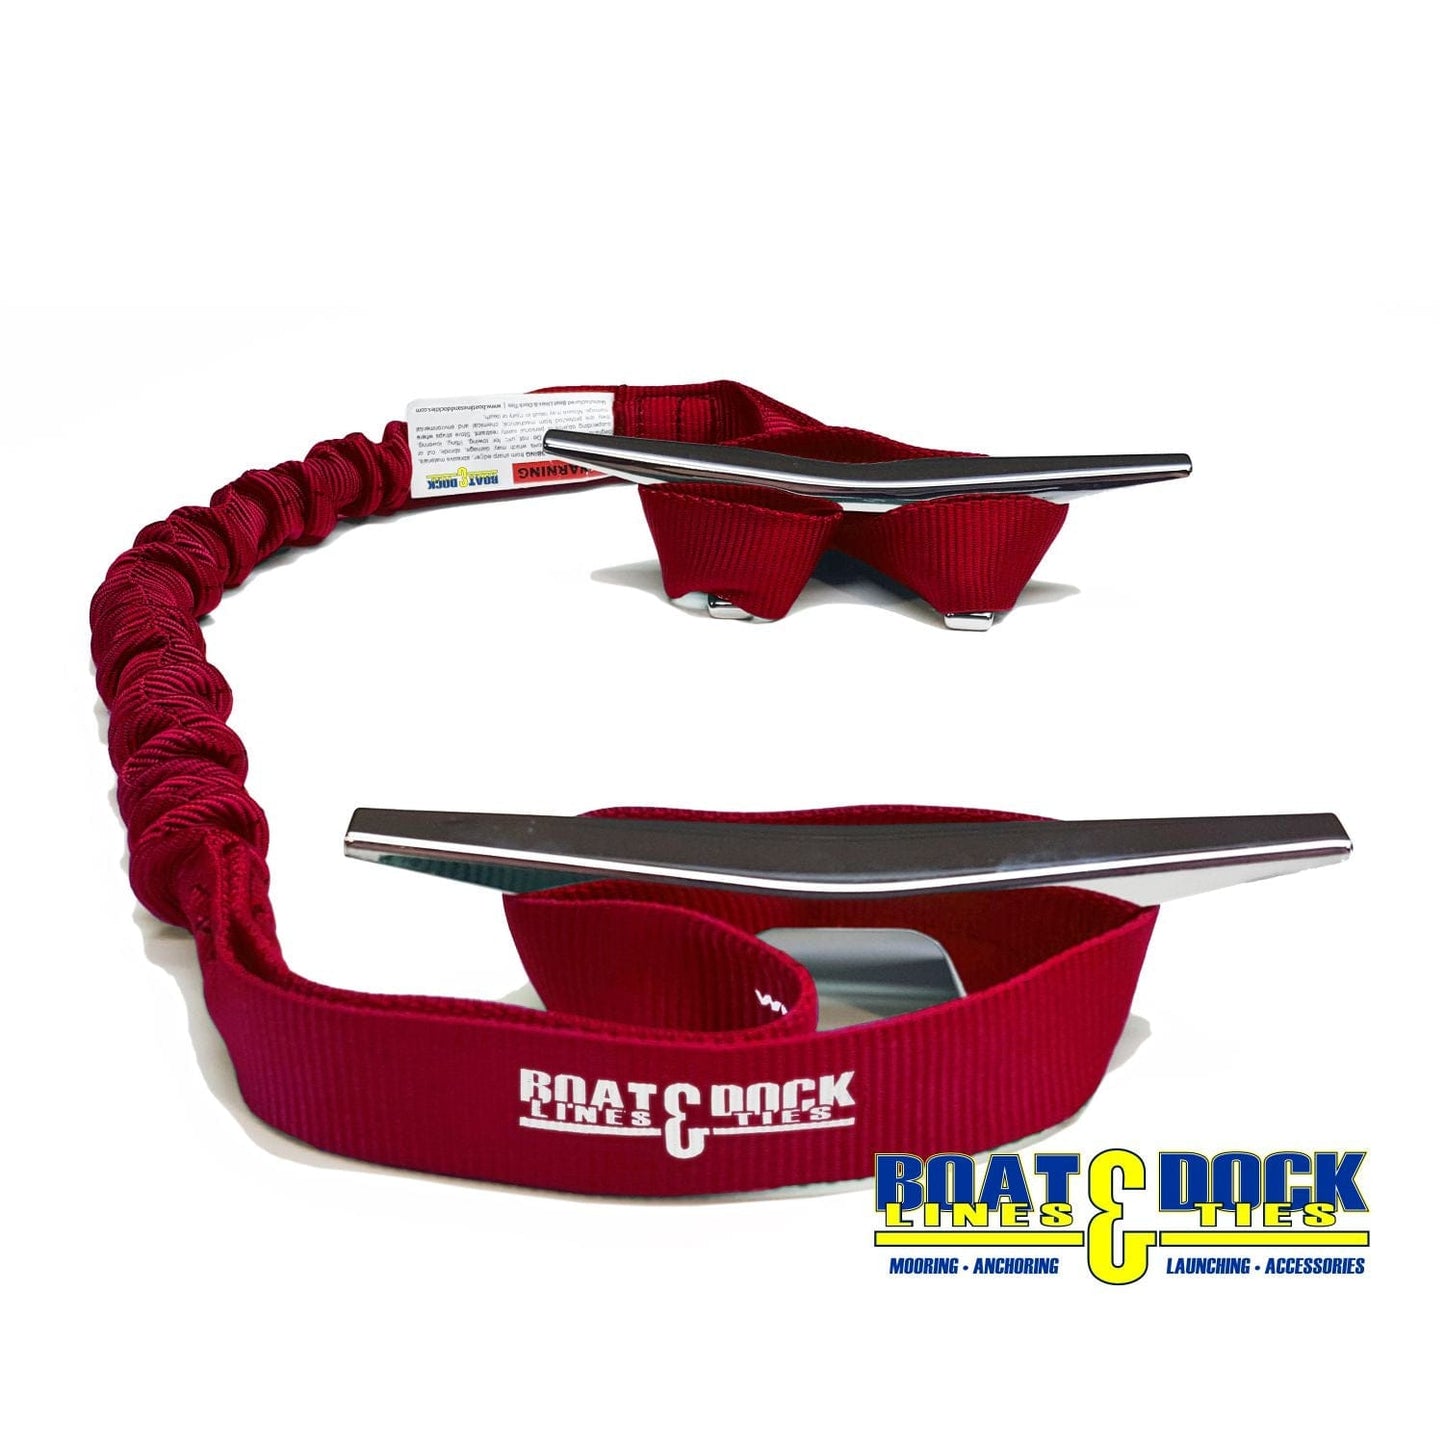 Bungee Dock Lines - 9-Inch Loop Ends, Made in USA, - Pack of 2 - Boat Lines & Dock Ties Boat Lines & Dock Ties Red / 30 Inches